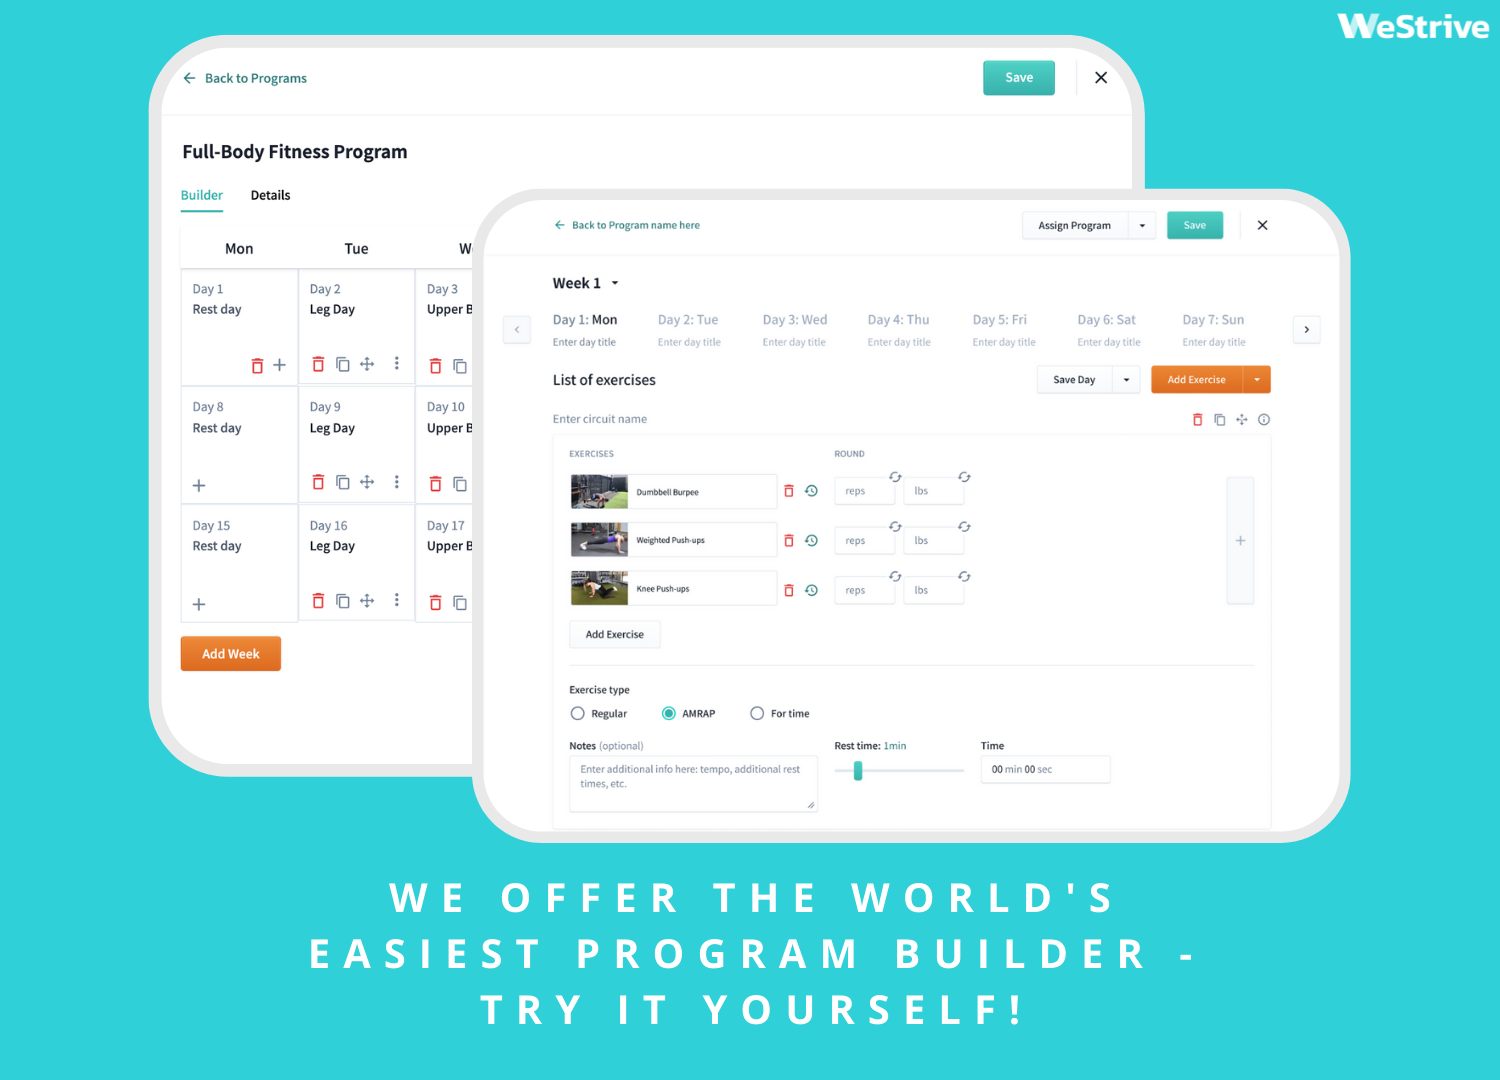 We offer the world's easiest program builder - try it yourself!